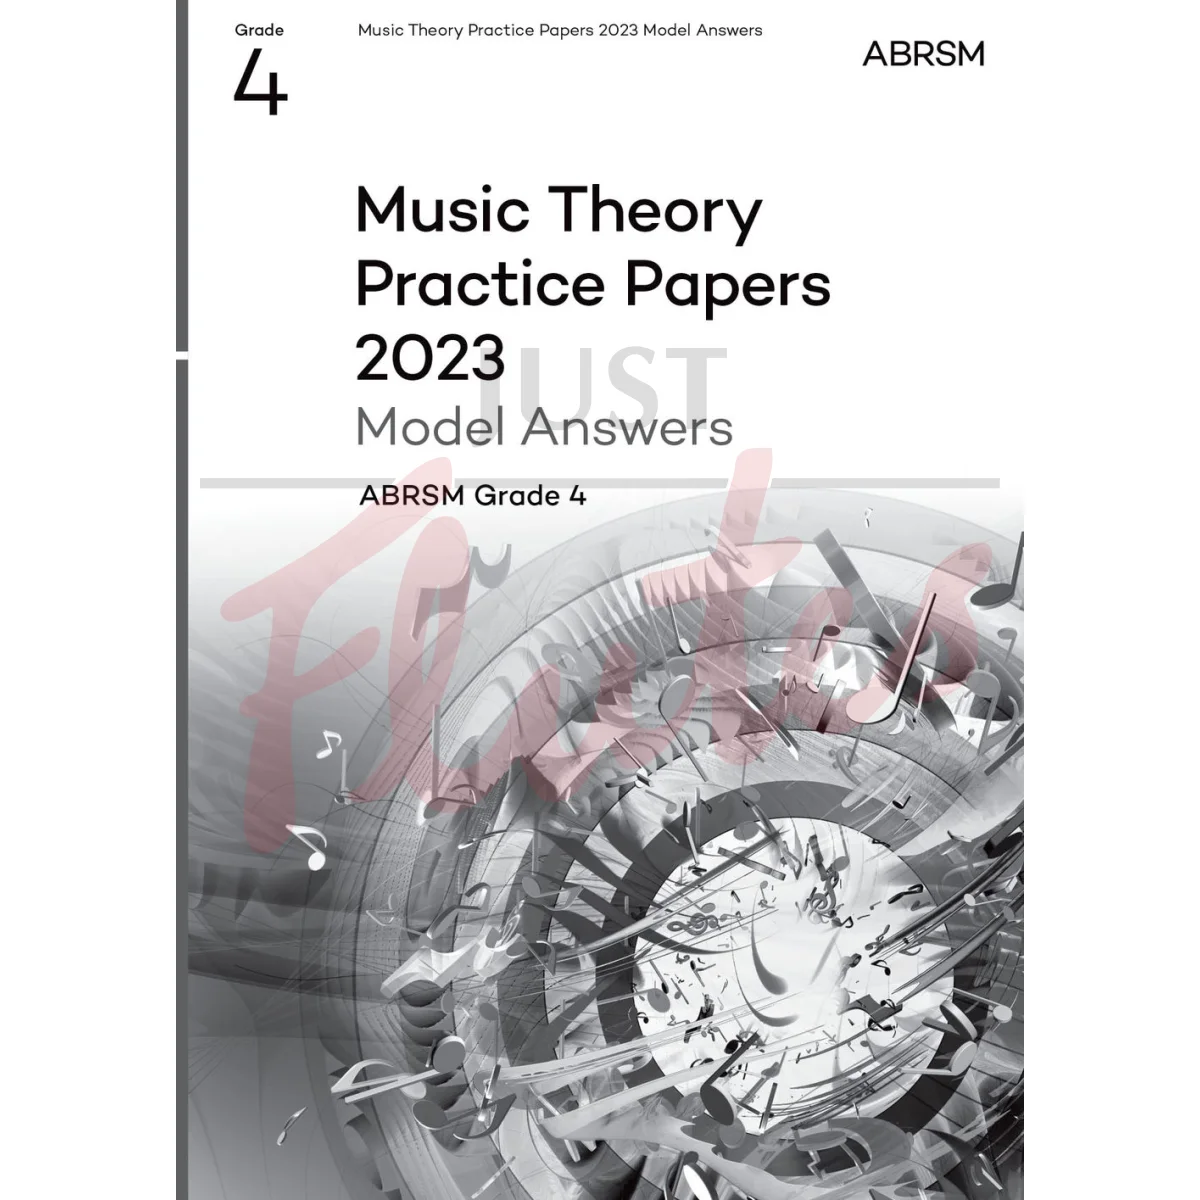 Music Theory Practice Papers 2023 Grade 4 - Model Answers